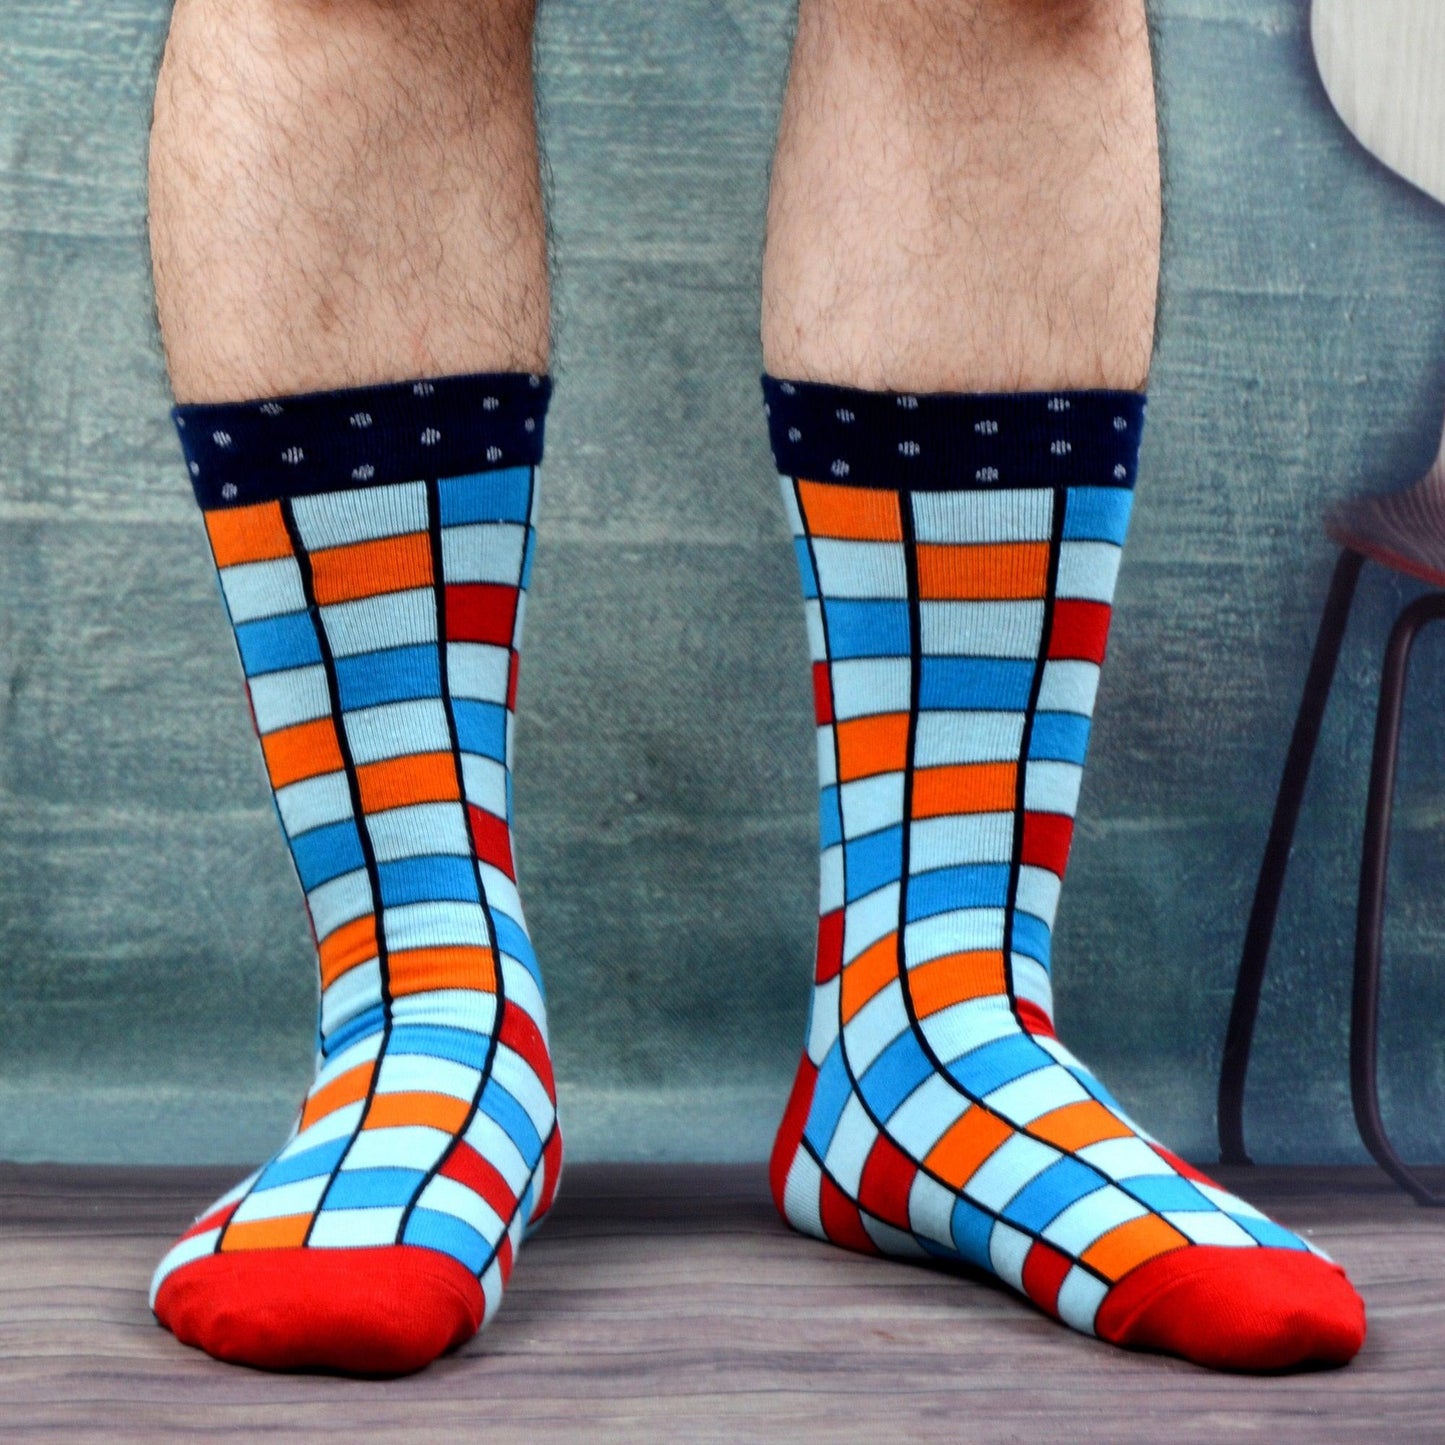 8 Pairs/Lot Cool Men's Colorful Funny Combed Cotton Novelty Socks Casual Crew Socks Bright Party Dress Socks For Gifts (TG8)(T6G)